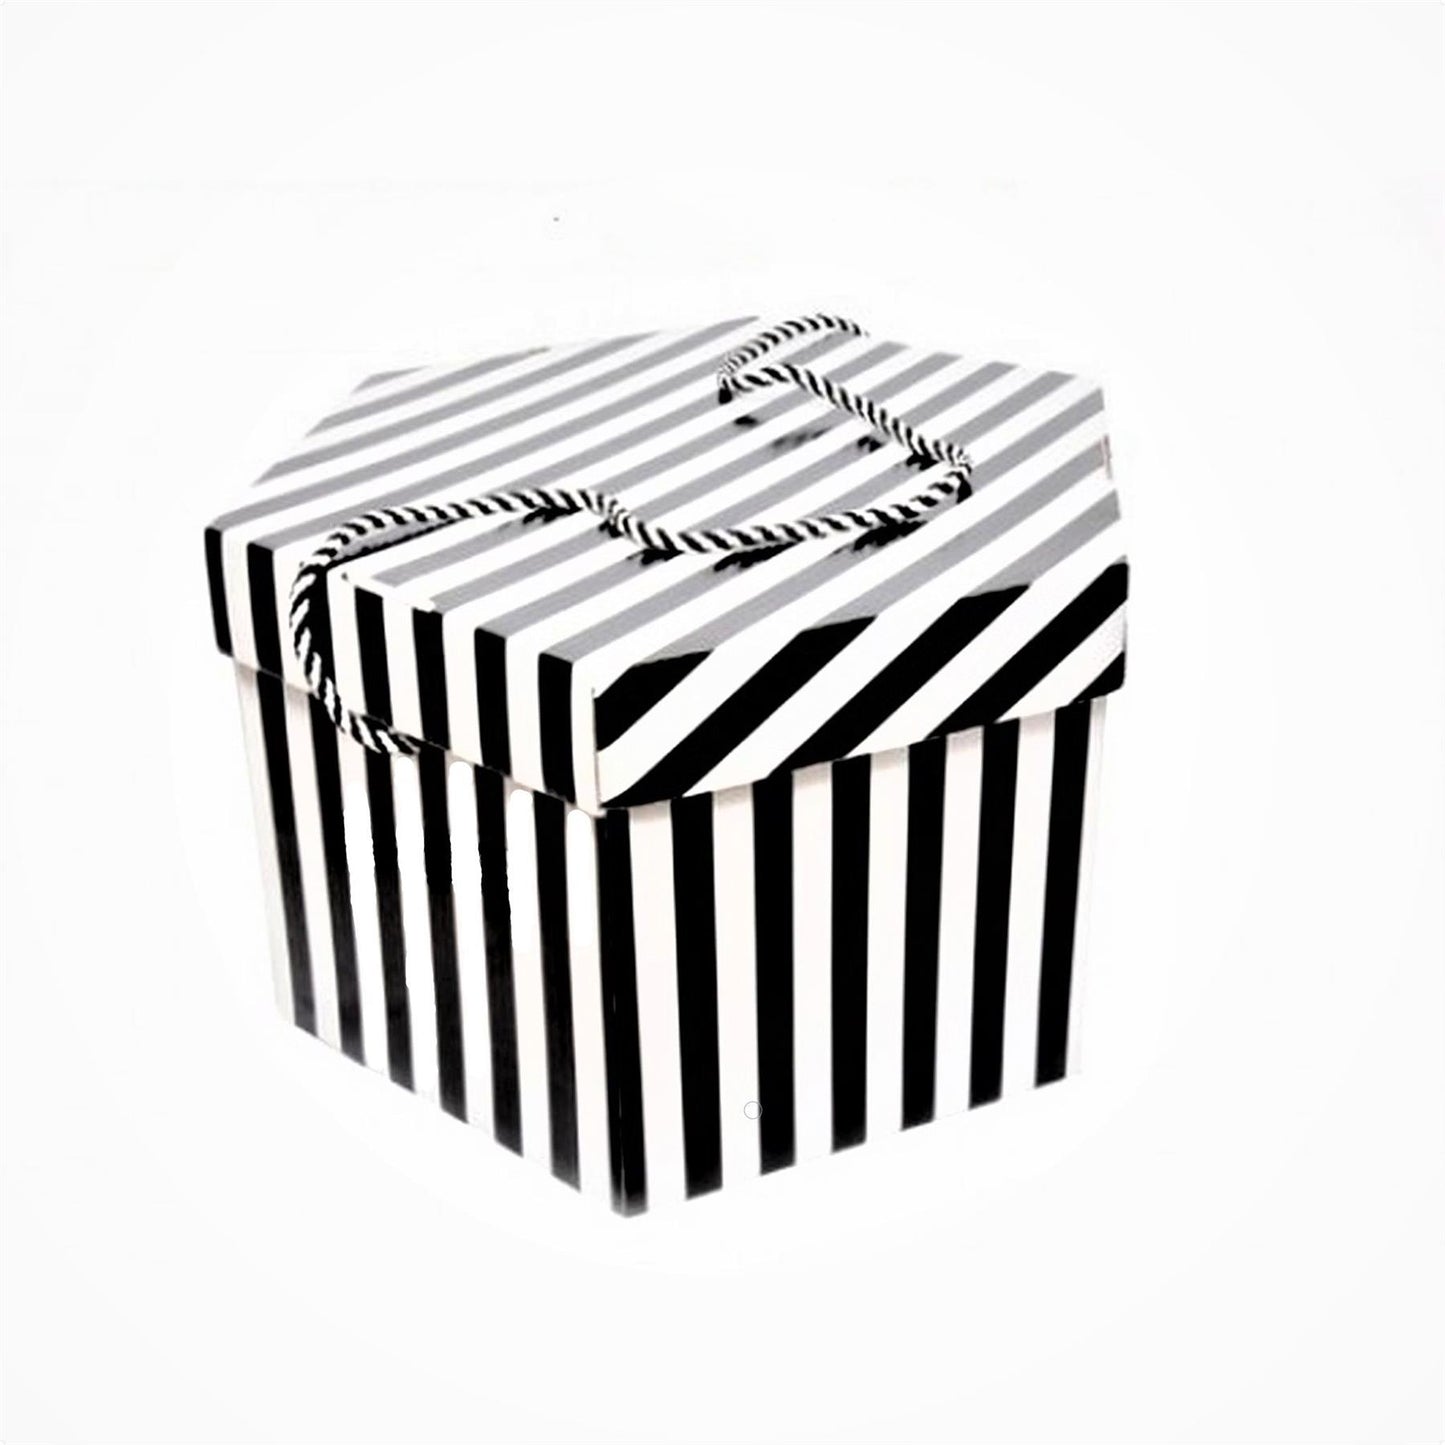 12Pcs Of 60cm Candy Stripe Hat Box For Hats Up To 51cm (20") HB060